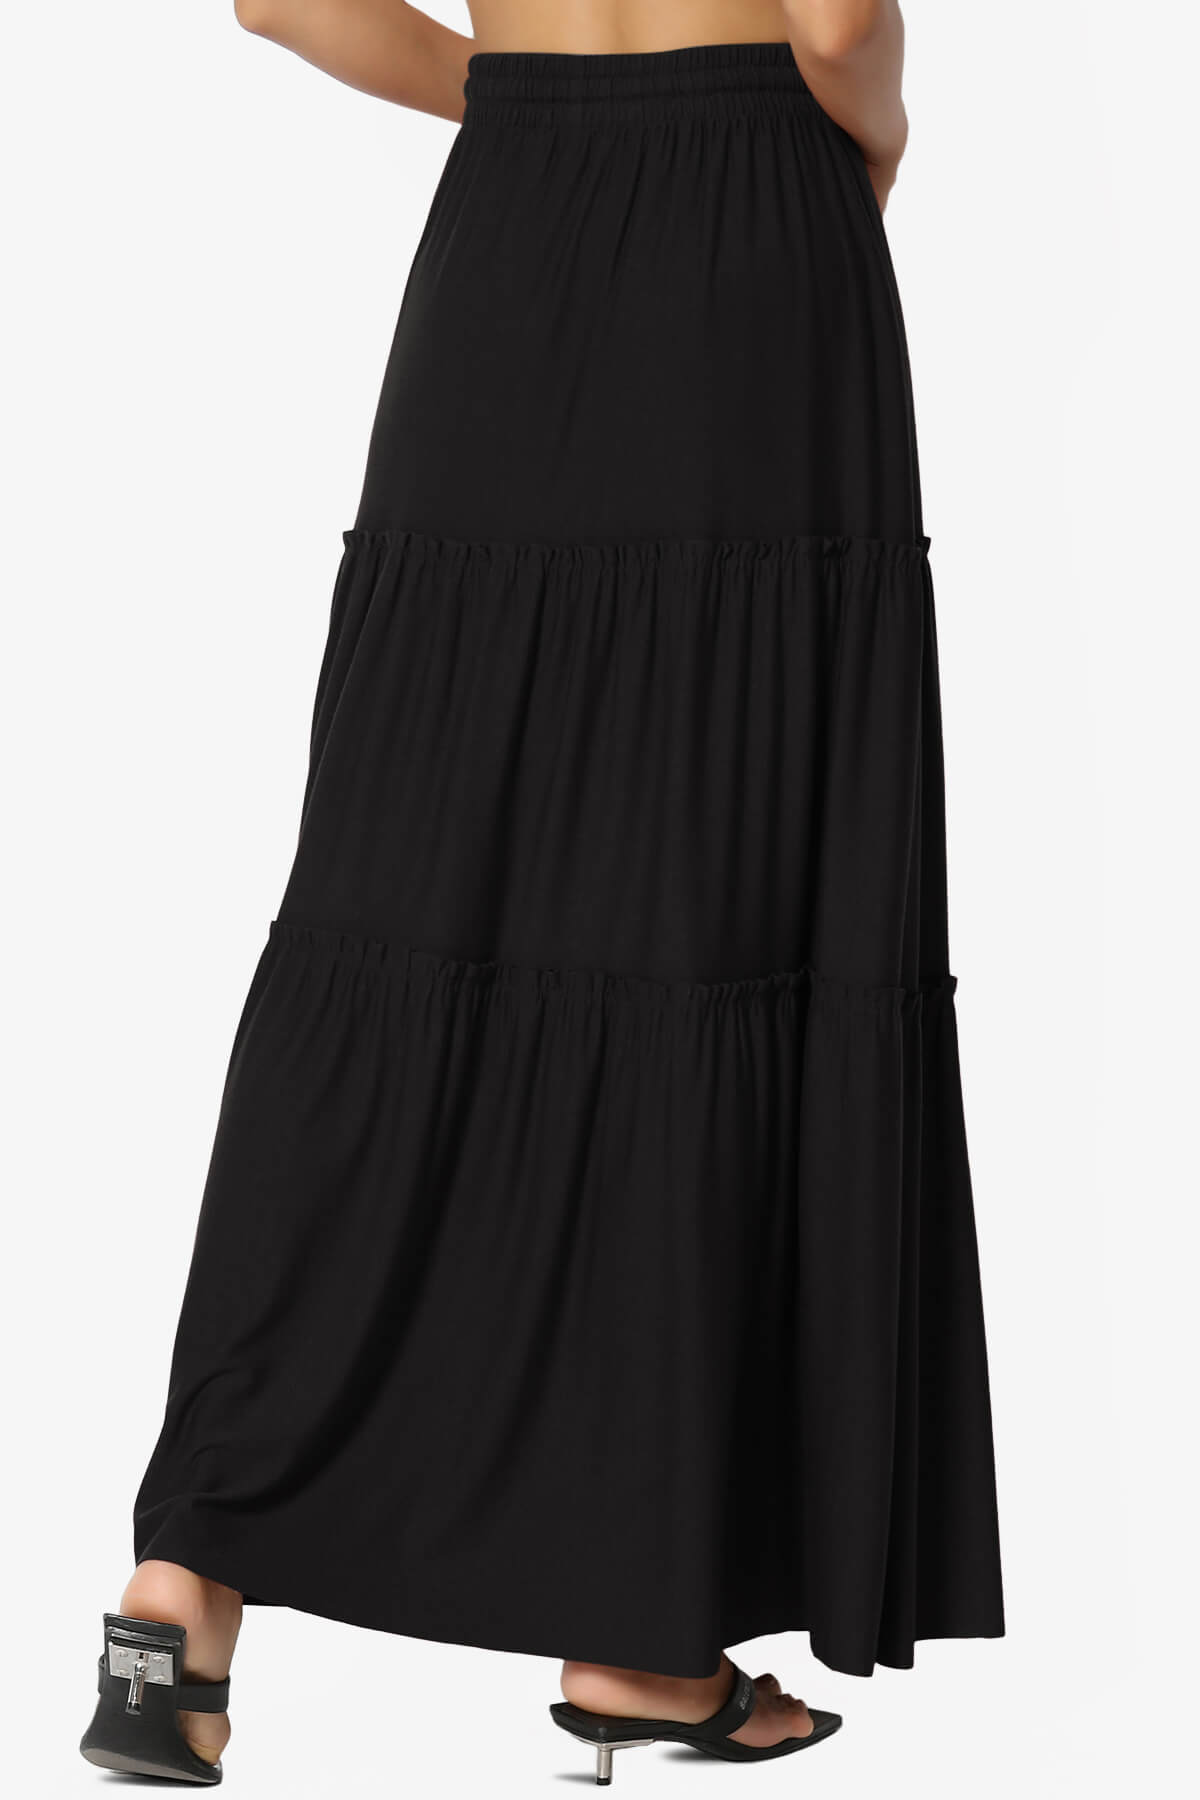 Ruffle Tiered Jersey Drawstring Elastic High Rise A-Line Long Maxi ...